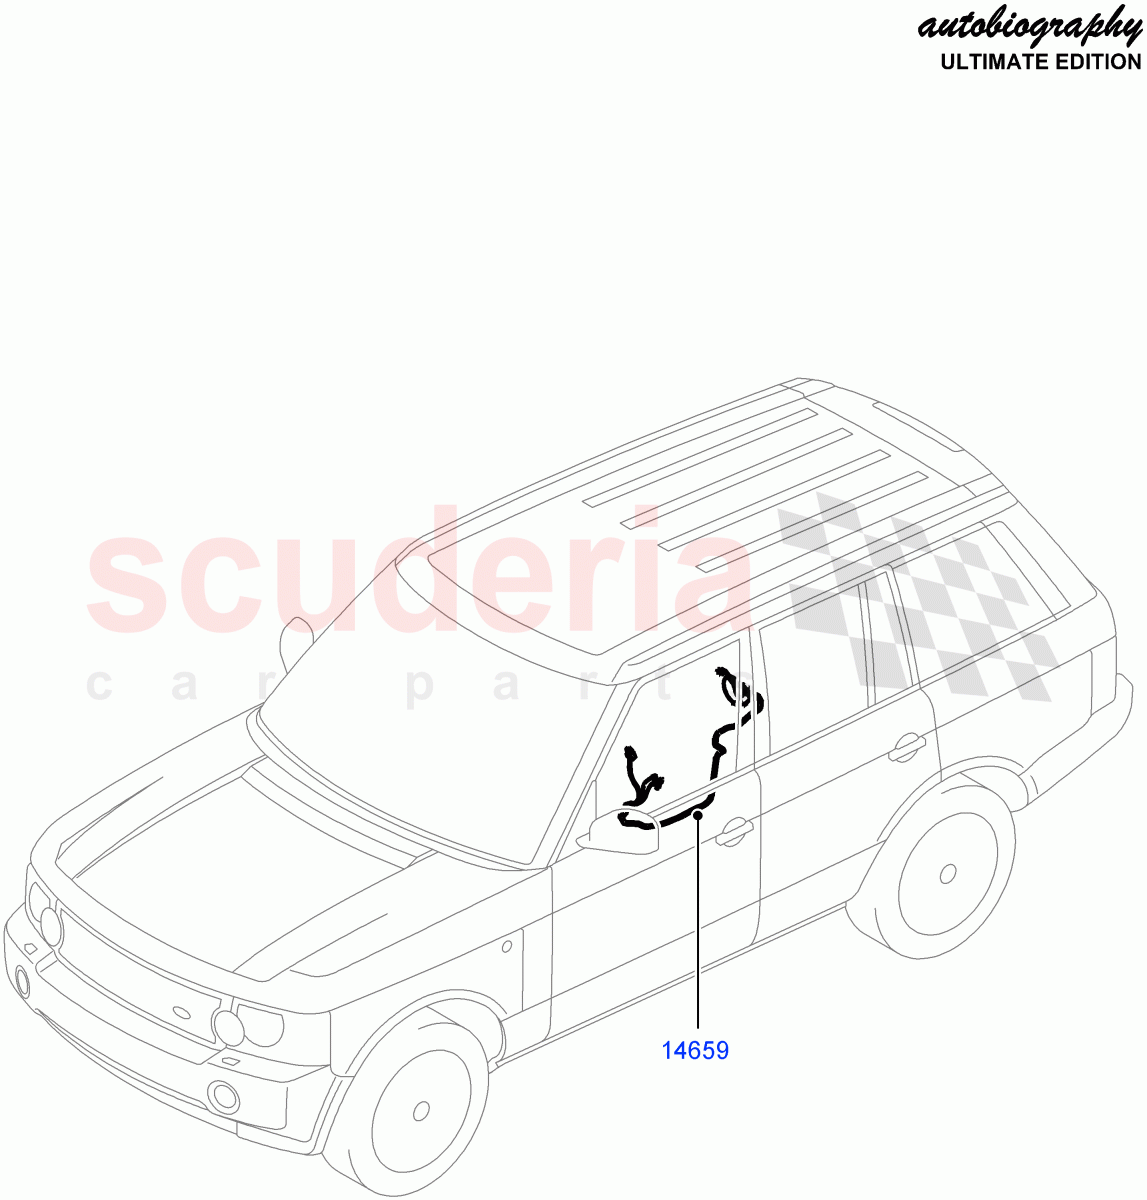 Wiring - Seats(Autobiography Ultimate Edition)((V)FROMBA344356) of Land Rover Land Rover Range Rover (2010-2012) [3.6 V8 32V DOHC EFI Diesel]